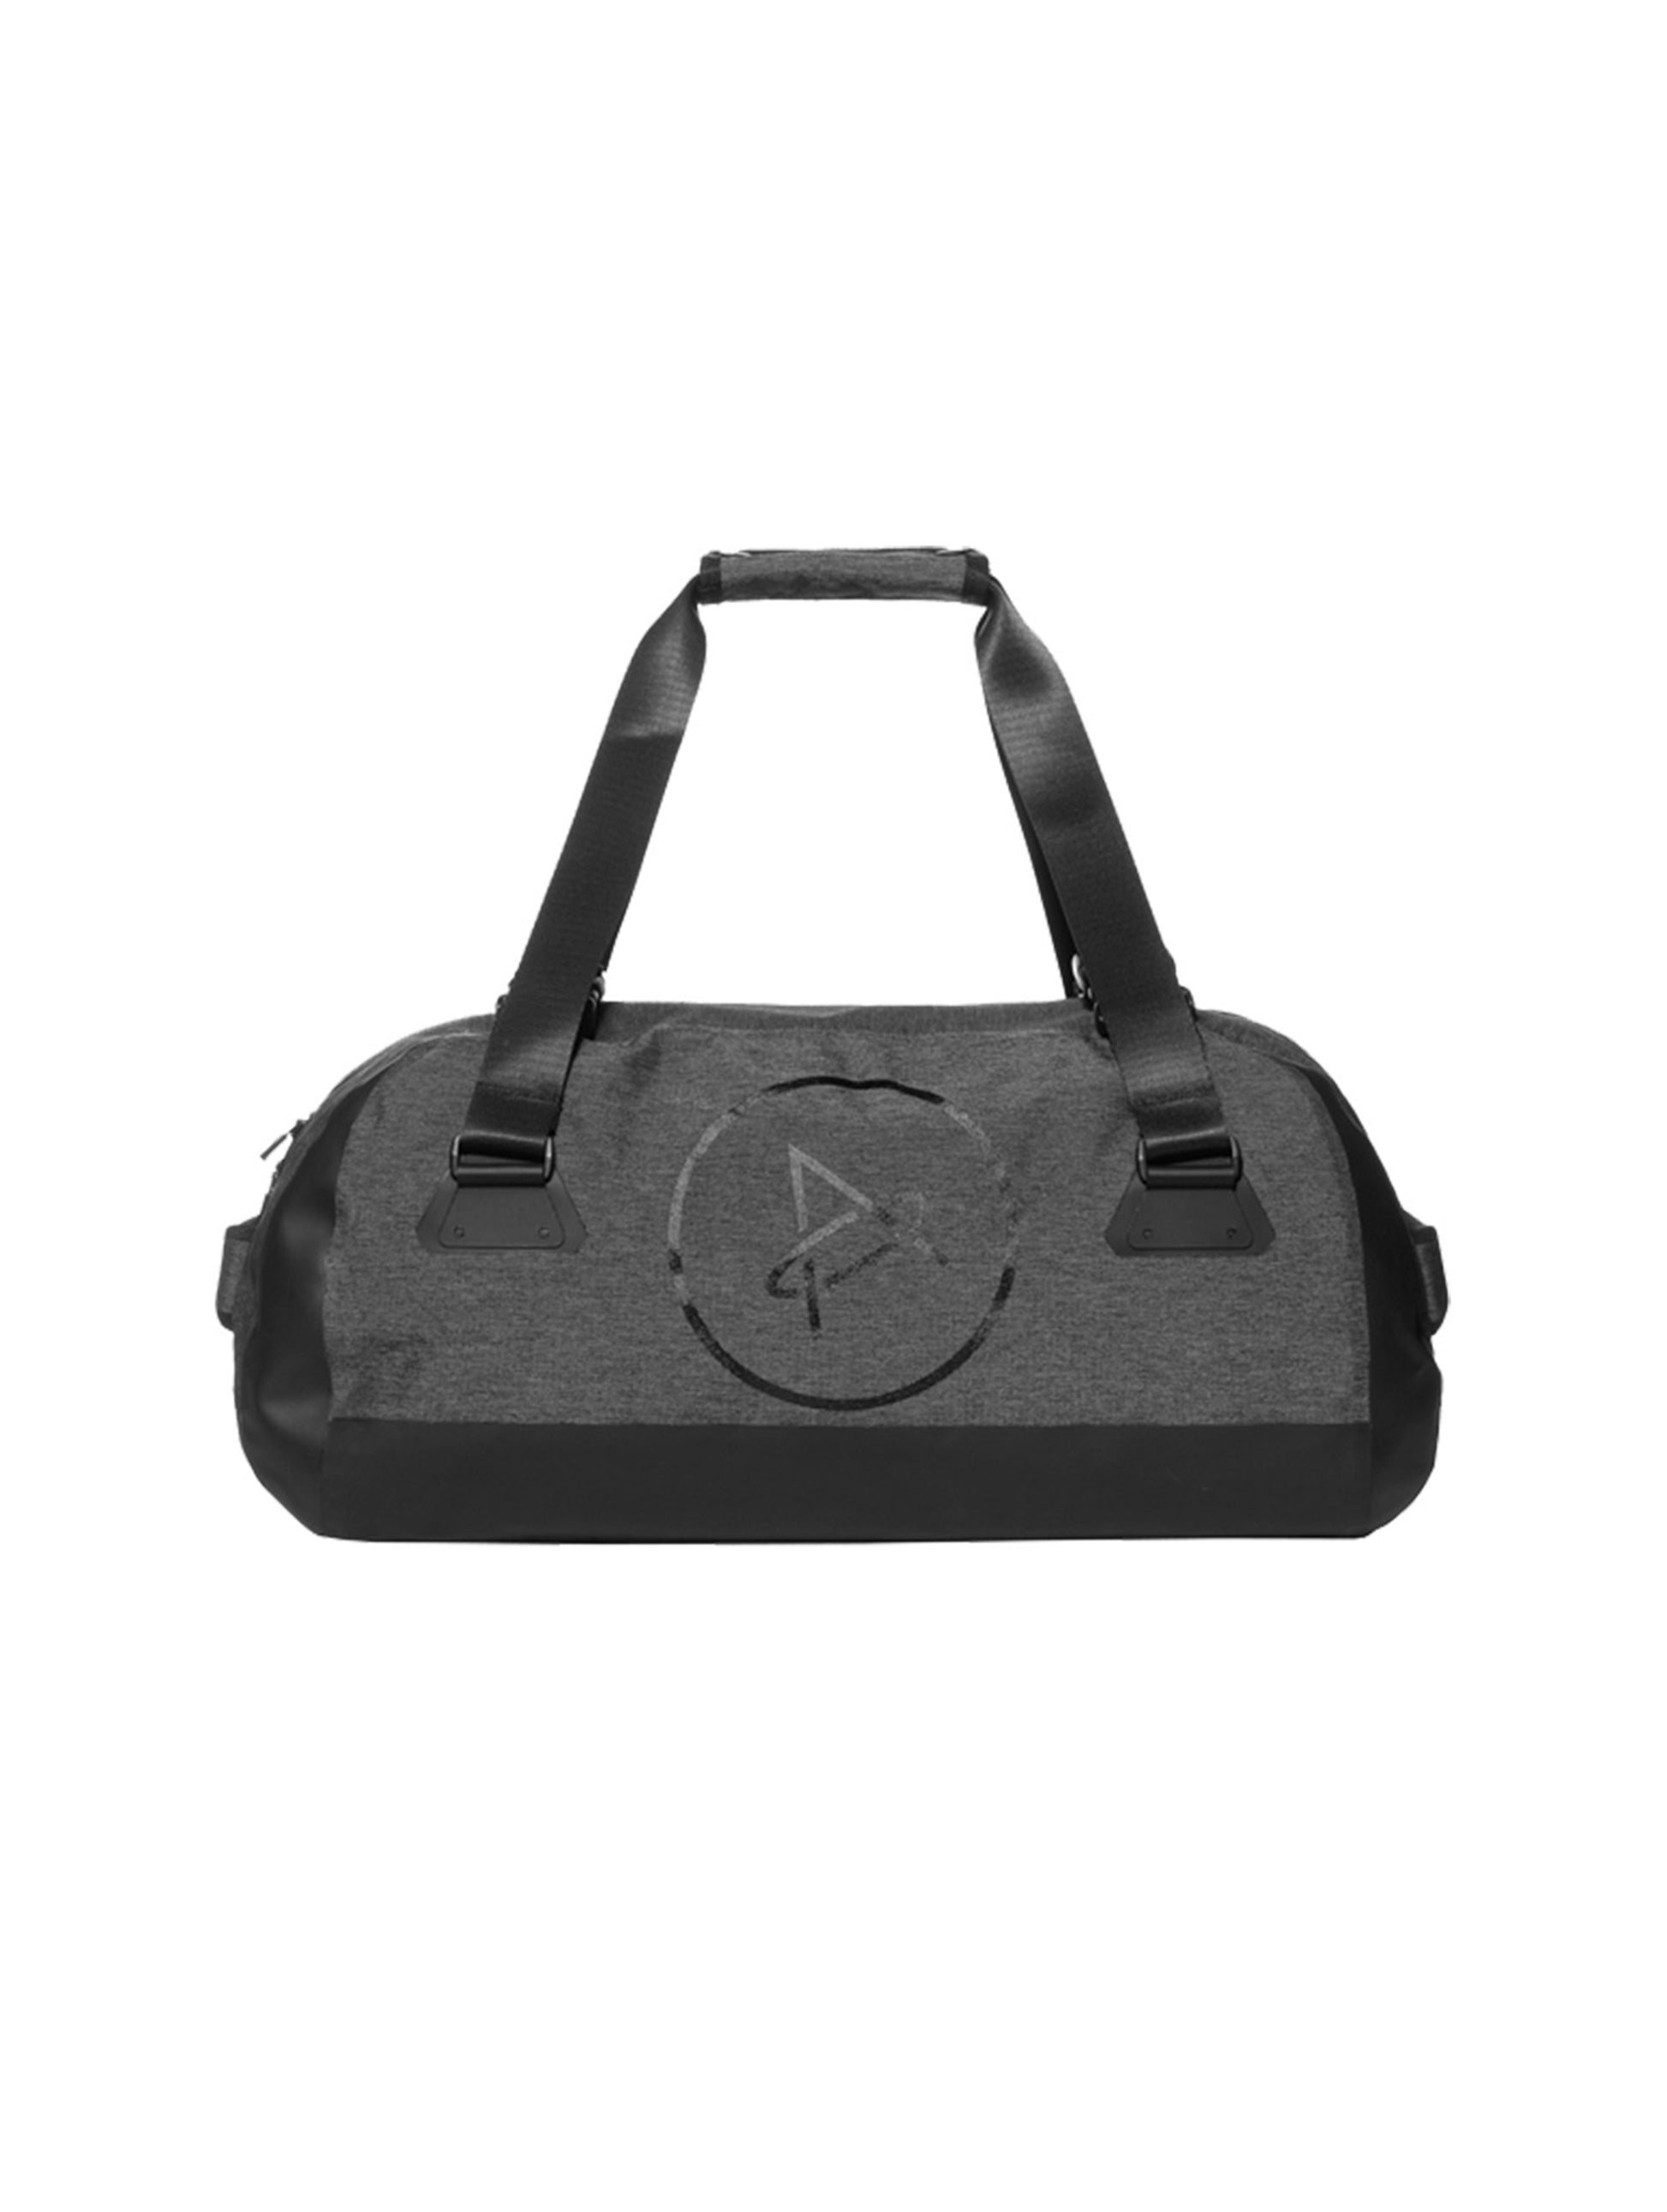 grey duffle bag from AETHER Apparel